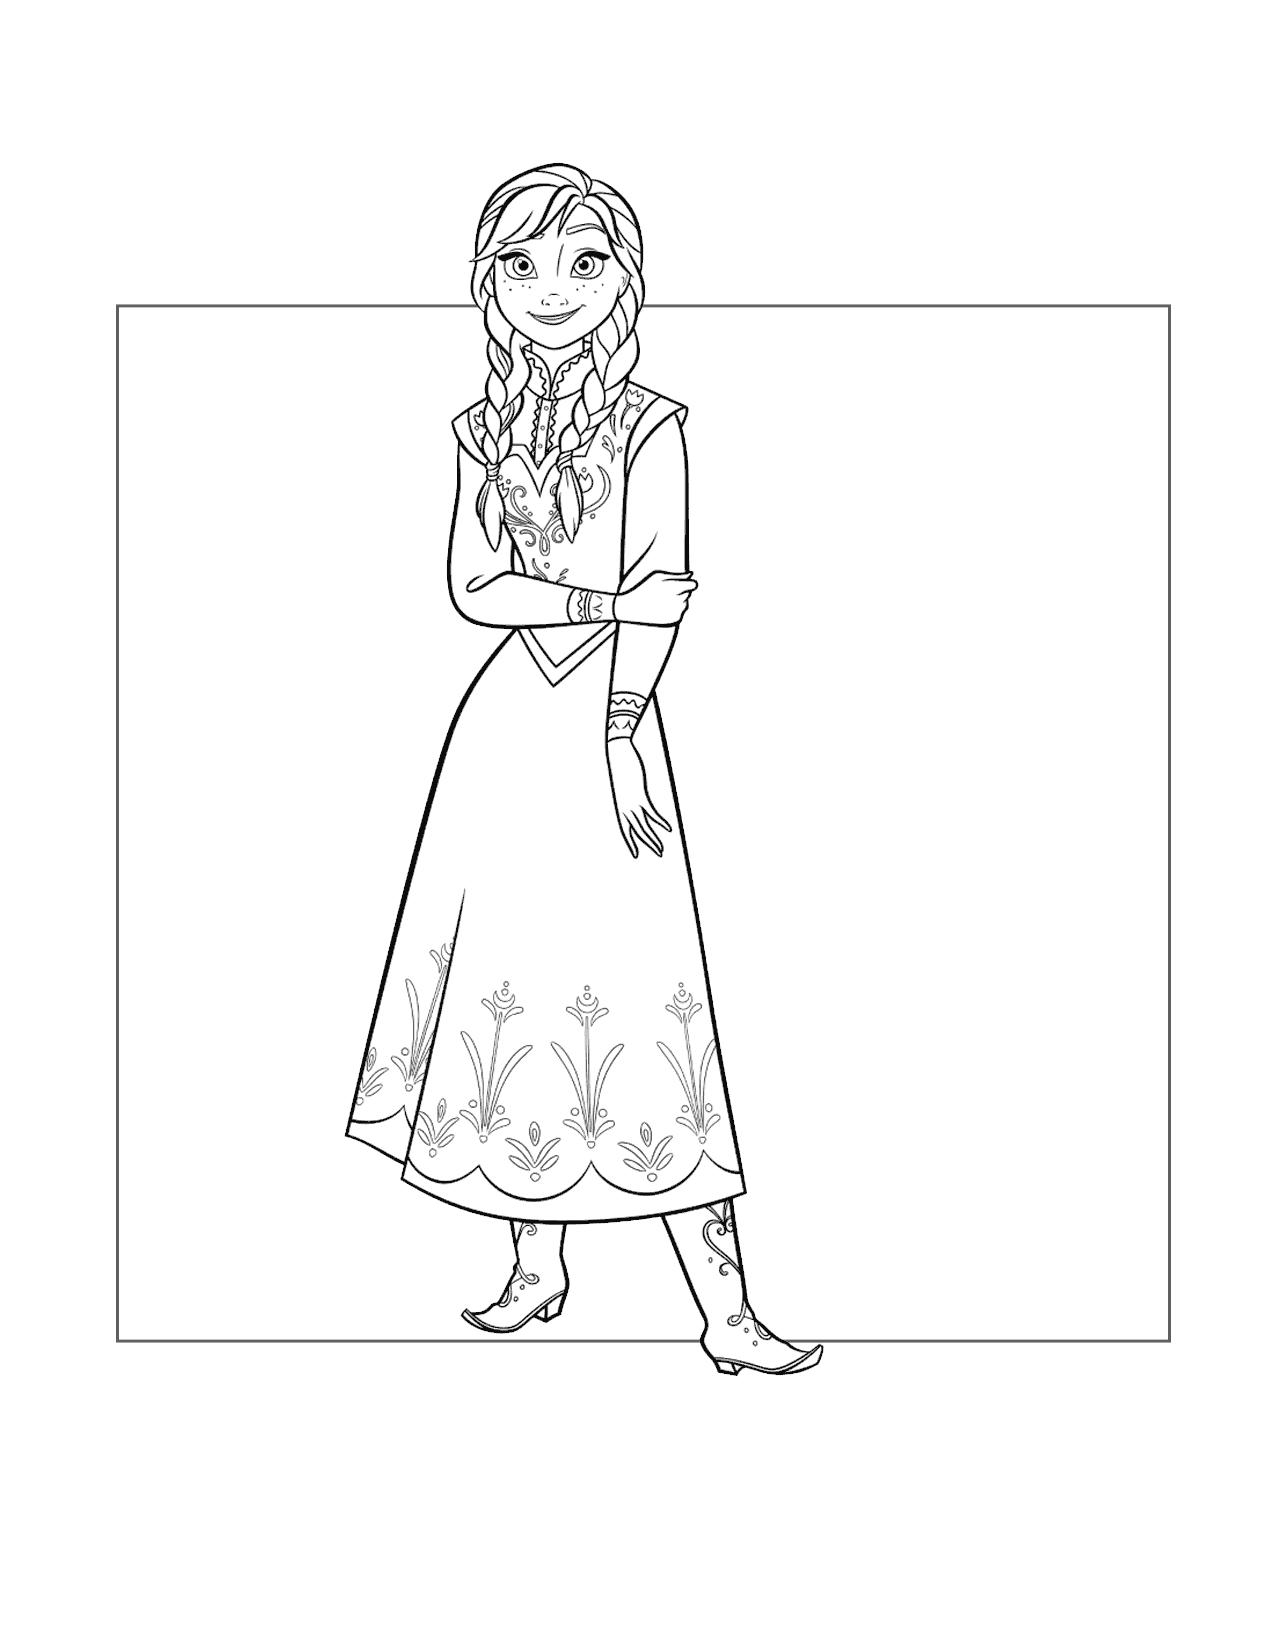 Anna Printable Coloring Pages